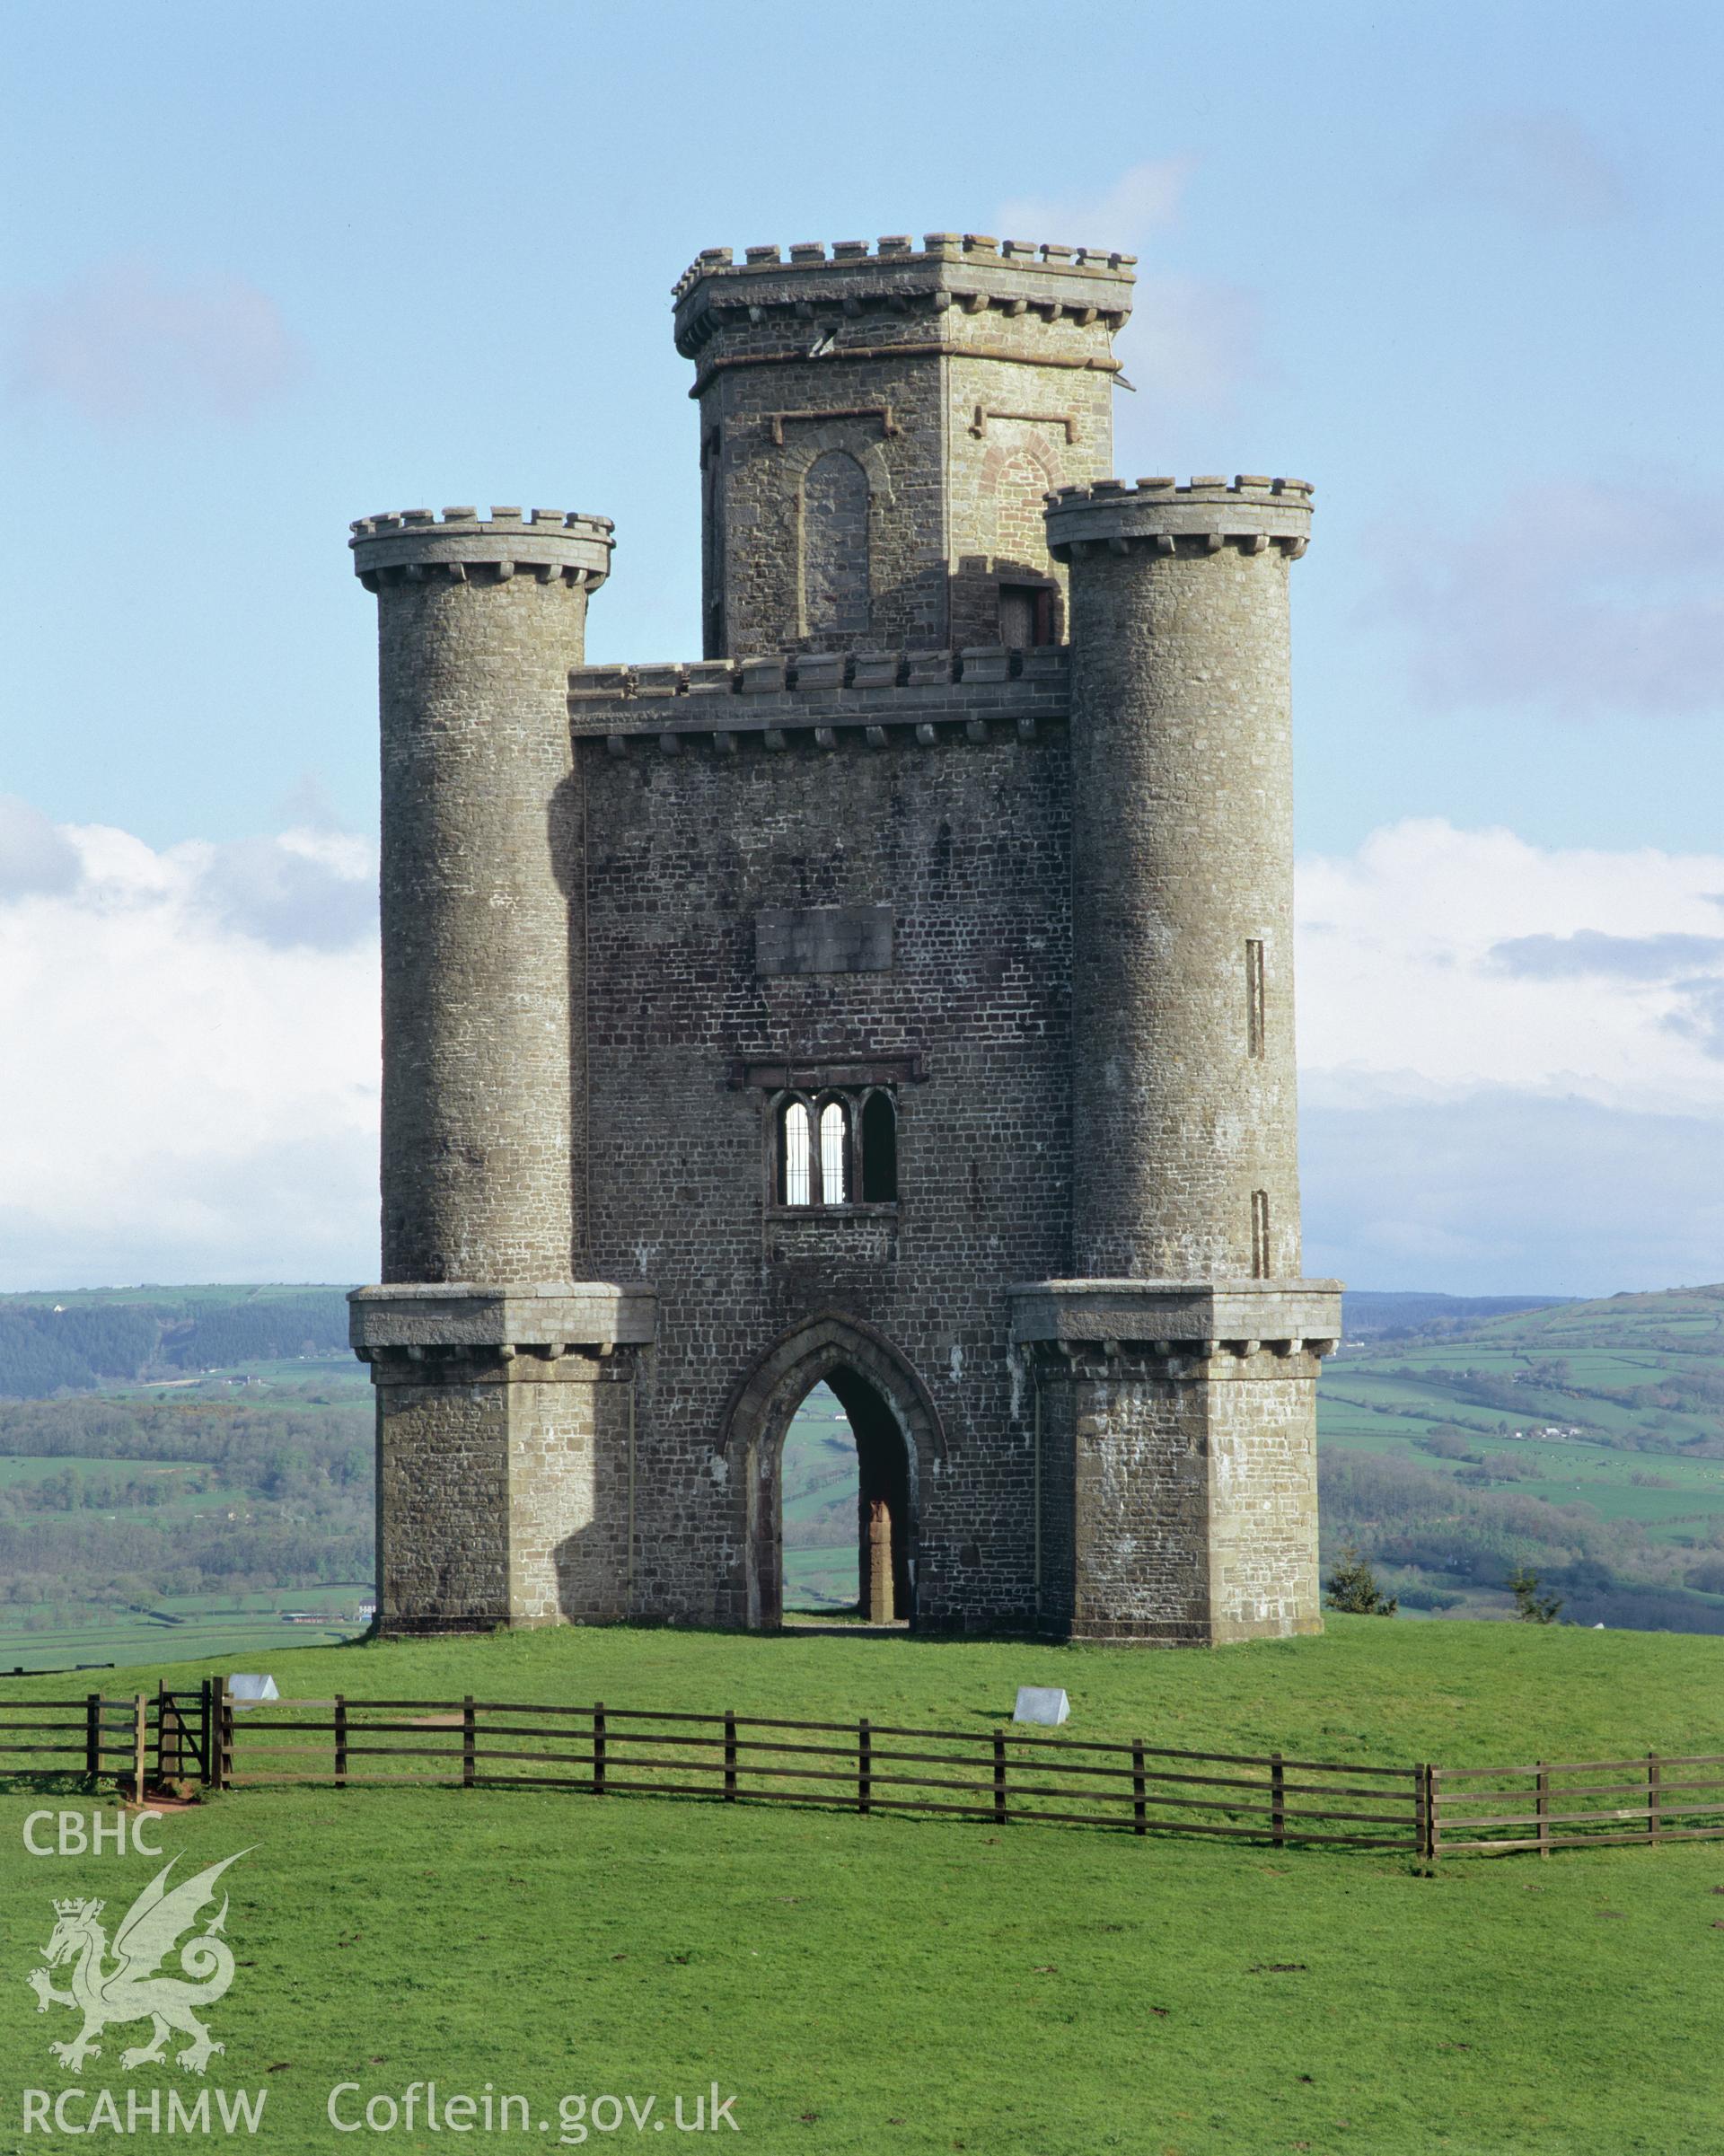 Colour transparency showing a view of Paxtons Tower, Llanarthney , produced by Iain Wright, June 2004